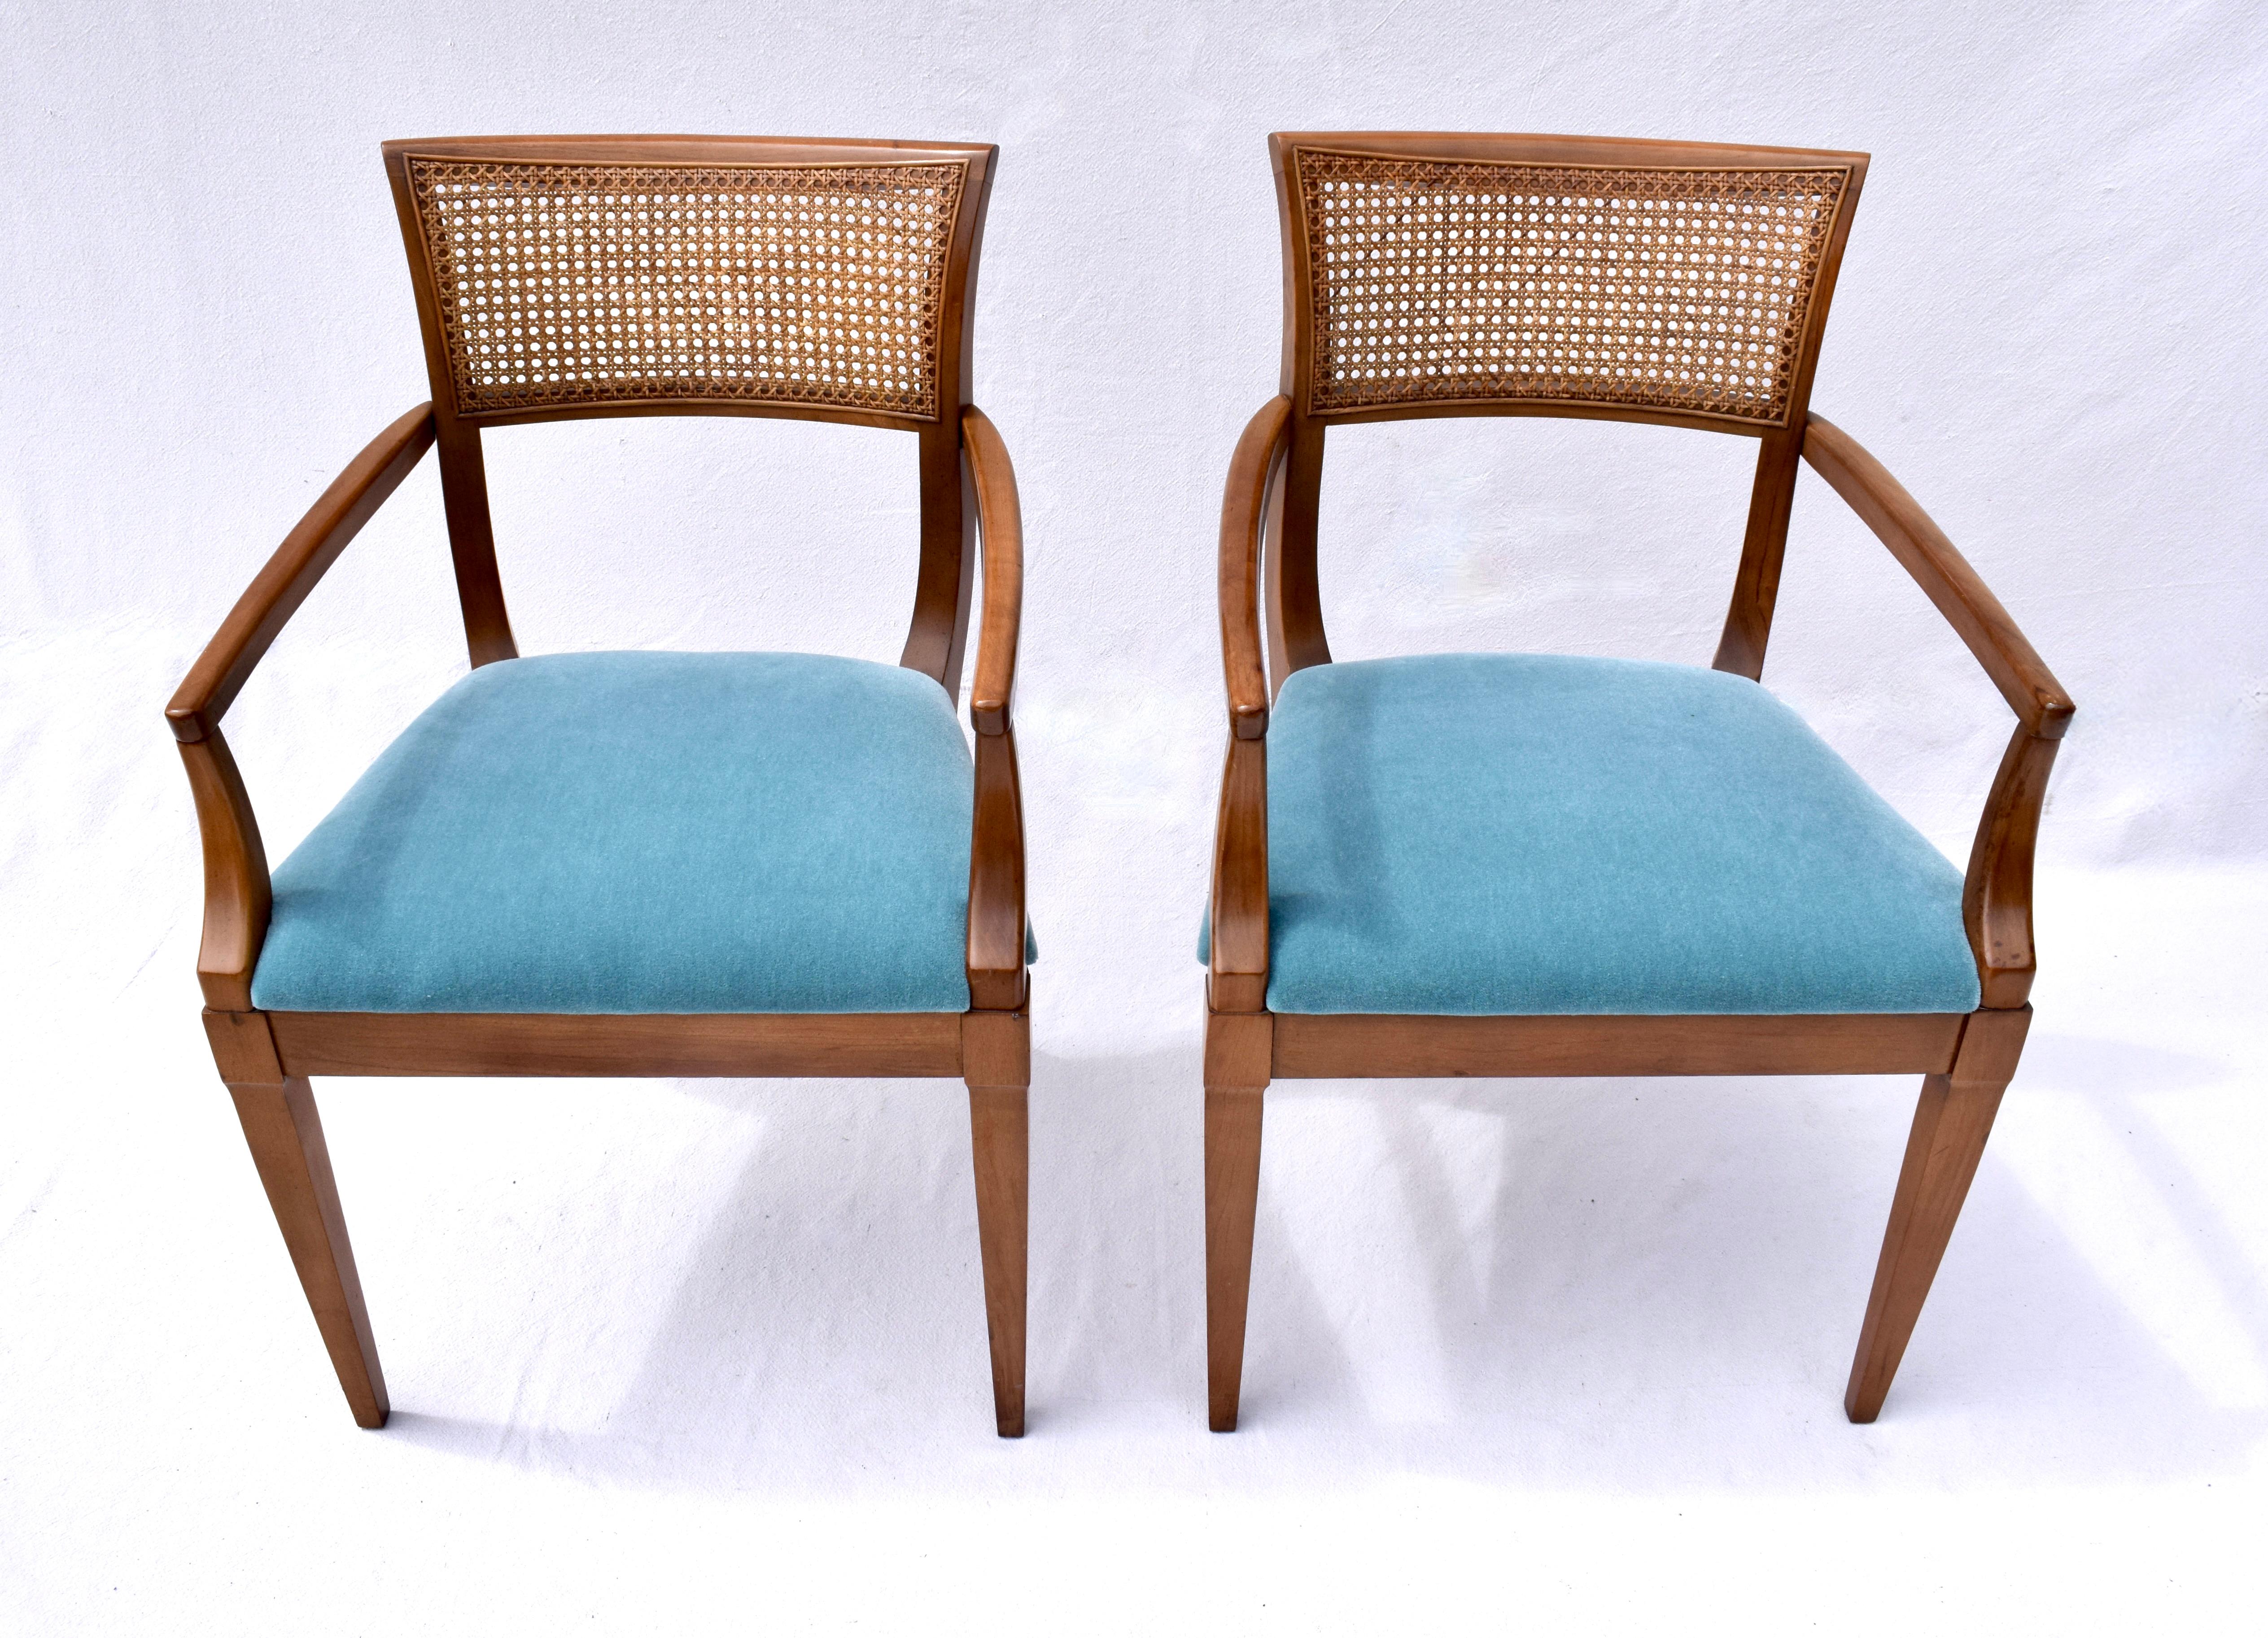 20th Century Regency Style Caned Back Dining Chairs in Teal Mohair